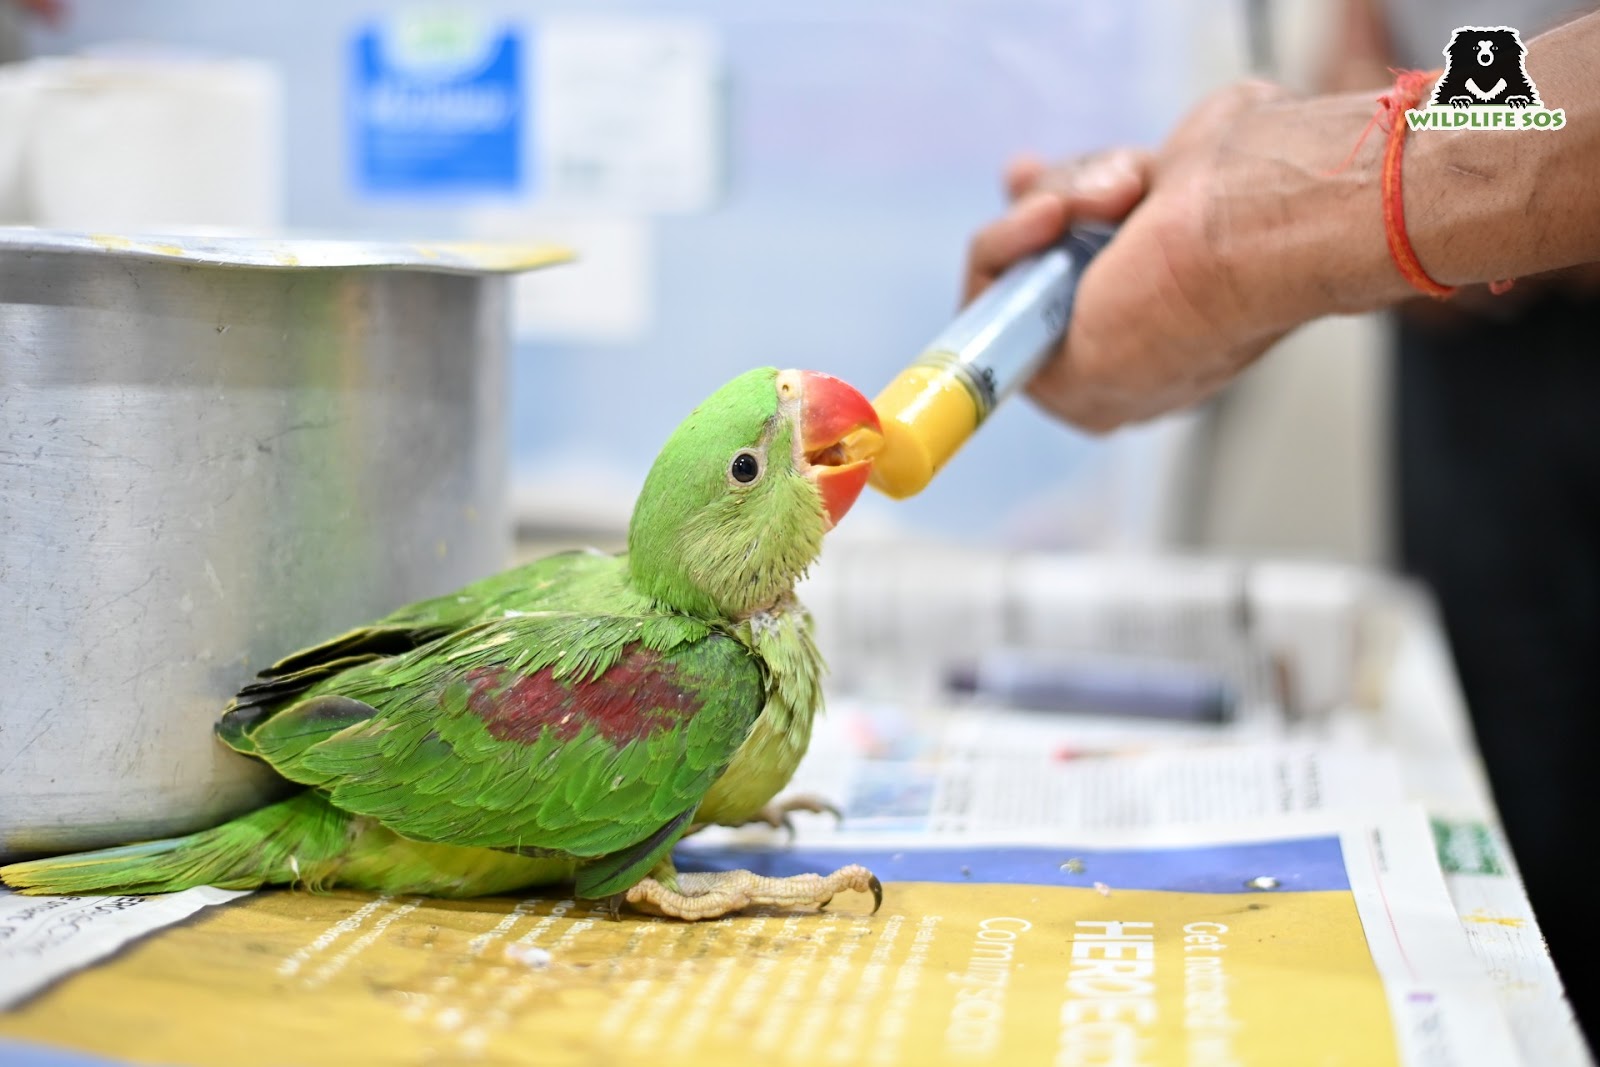 Parakeets are cared for at Wildlife SOS